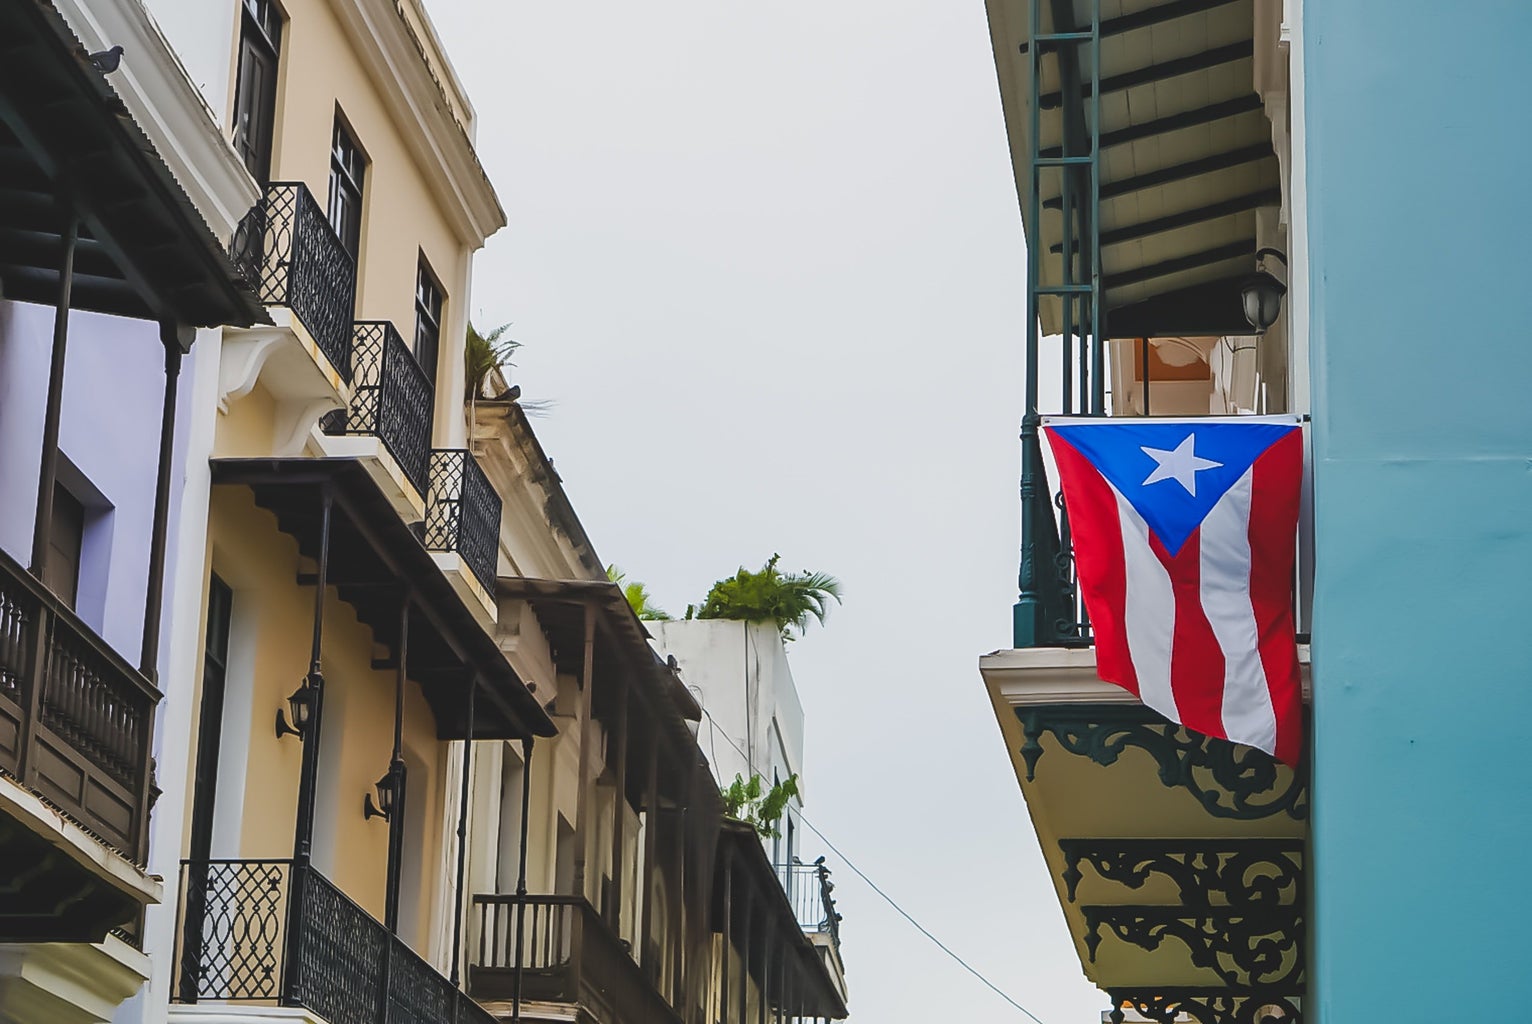 street with Puerto Rican flag